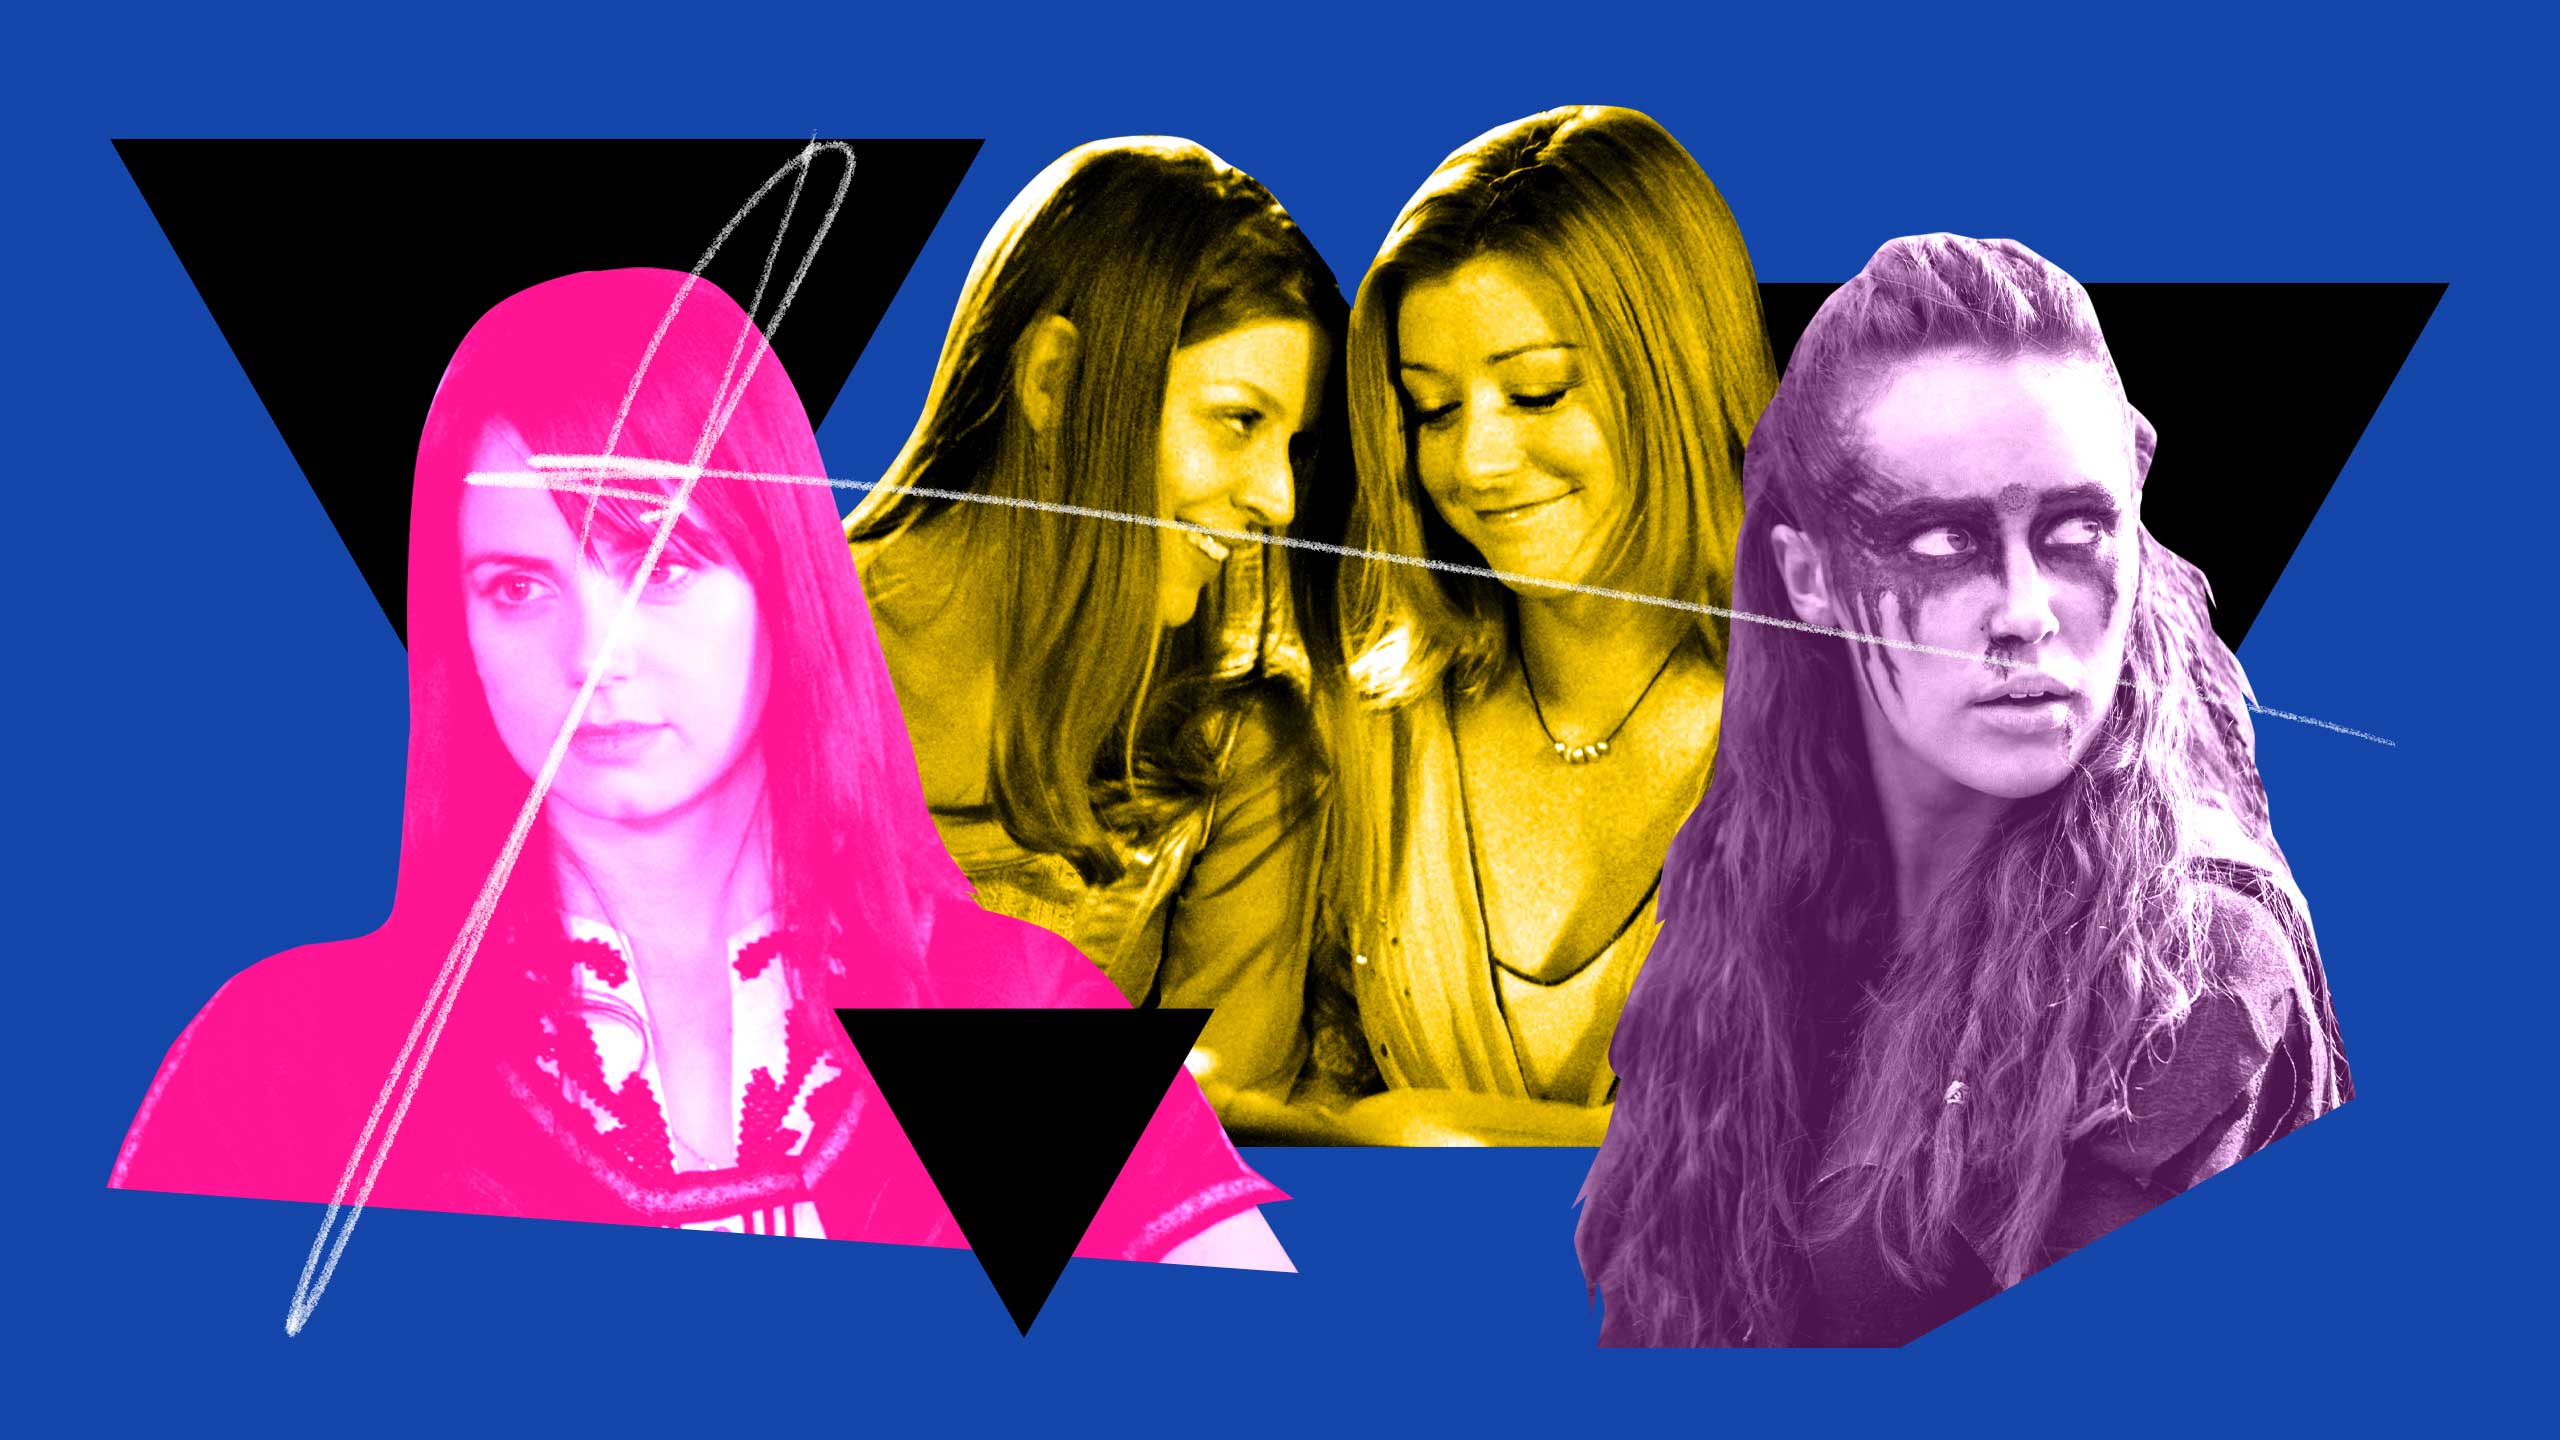 Why do TV lesbians still fall victim to the Bury Your Gays trope? Xtra Magazine